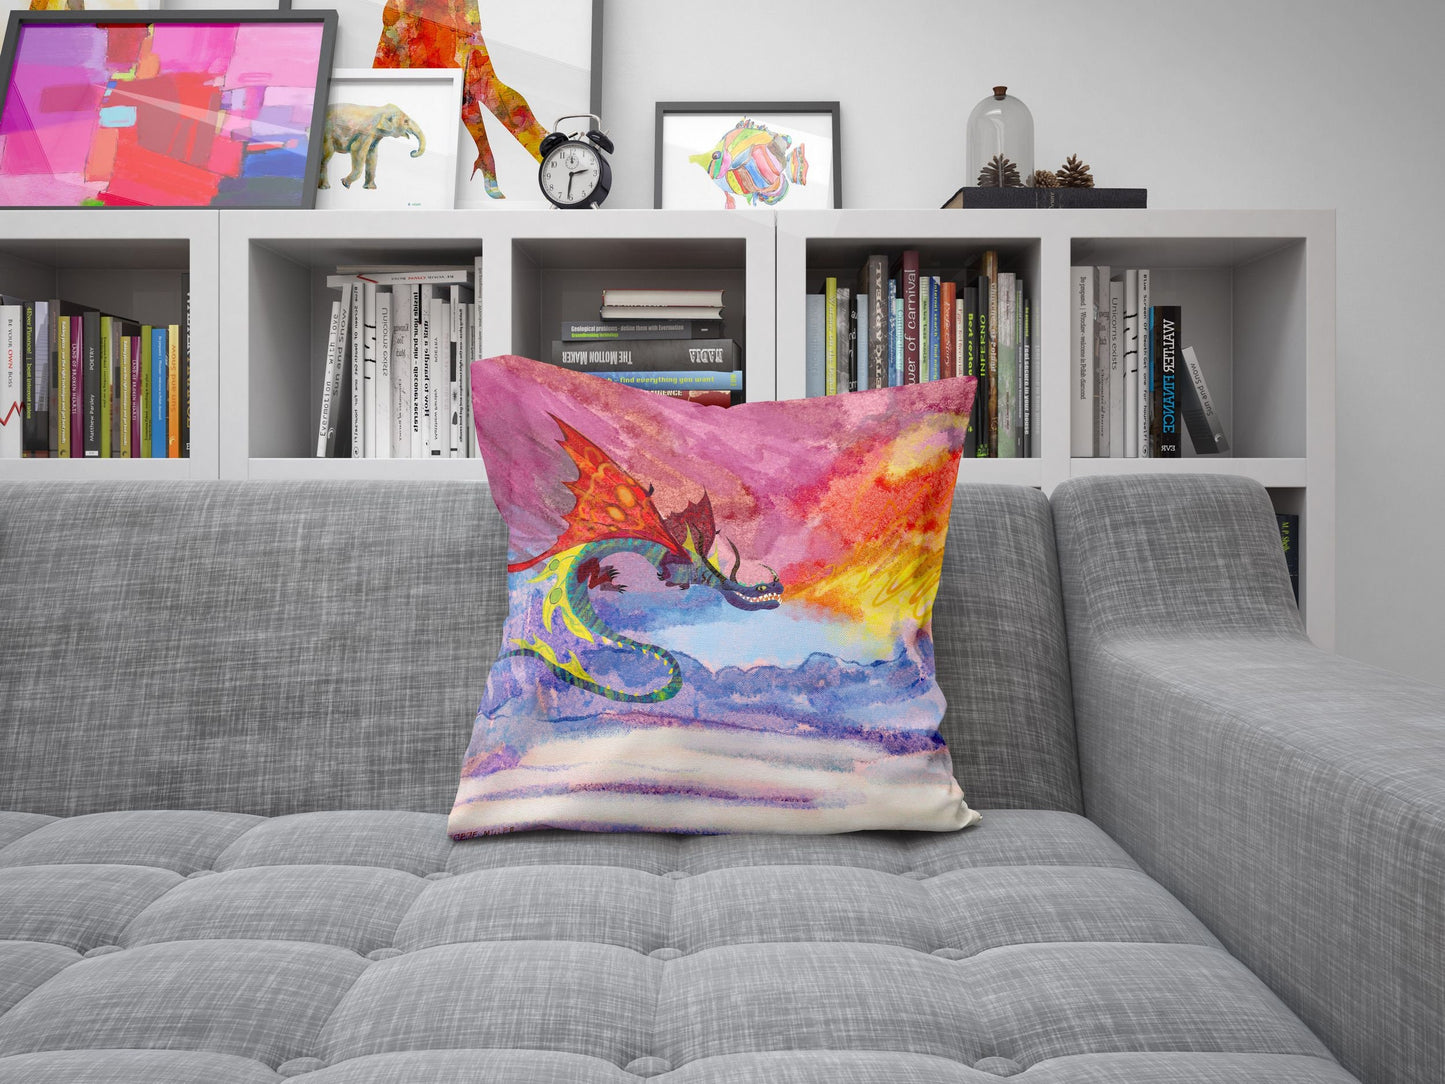 Fire Breathing Dragon Fantasy Pillow Cases For Kids, Throw Pillow, Abstract Art Pillow, Original Art Pillow, Red Pillow Cases, Fashion